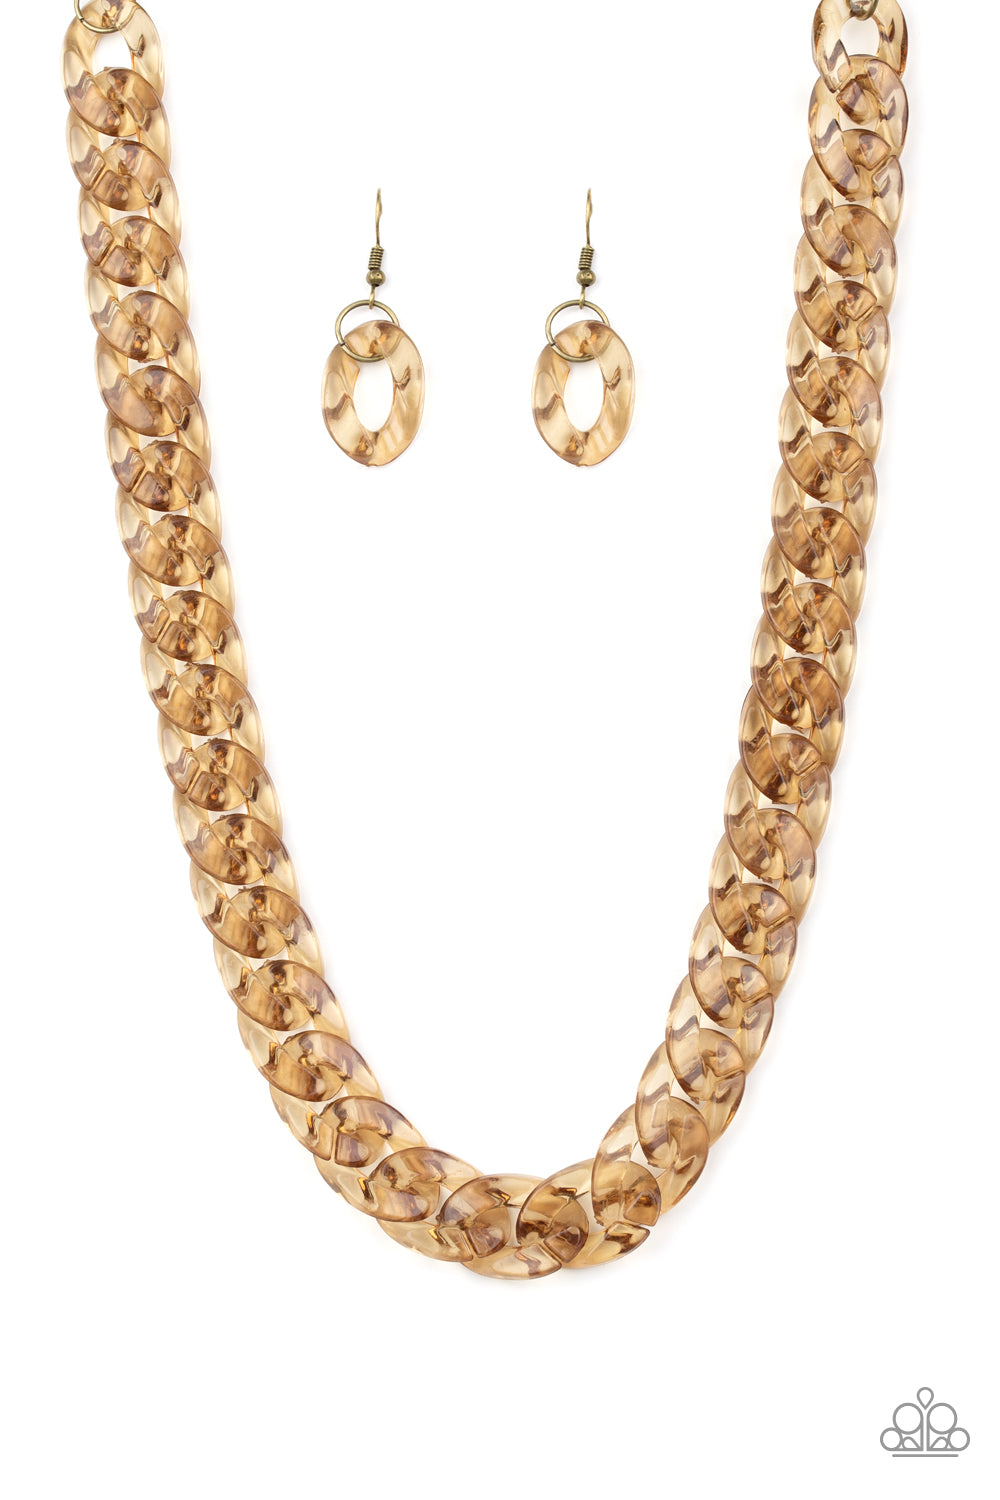 Paparazzi Accessories Put It On Ice - Brass Necklaces - Lady T Accessories